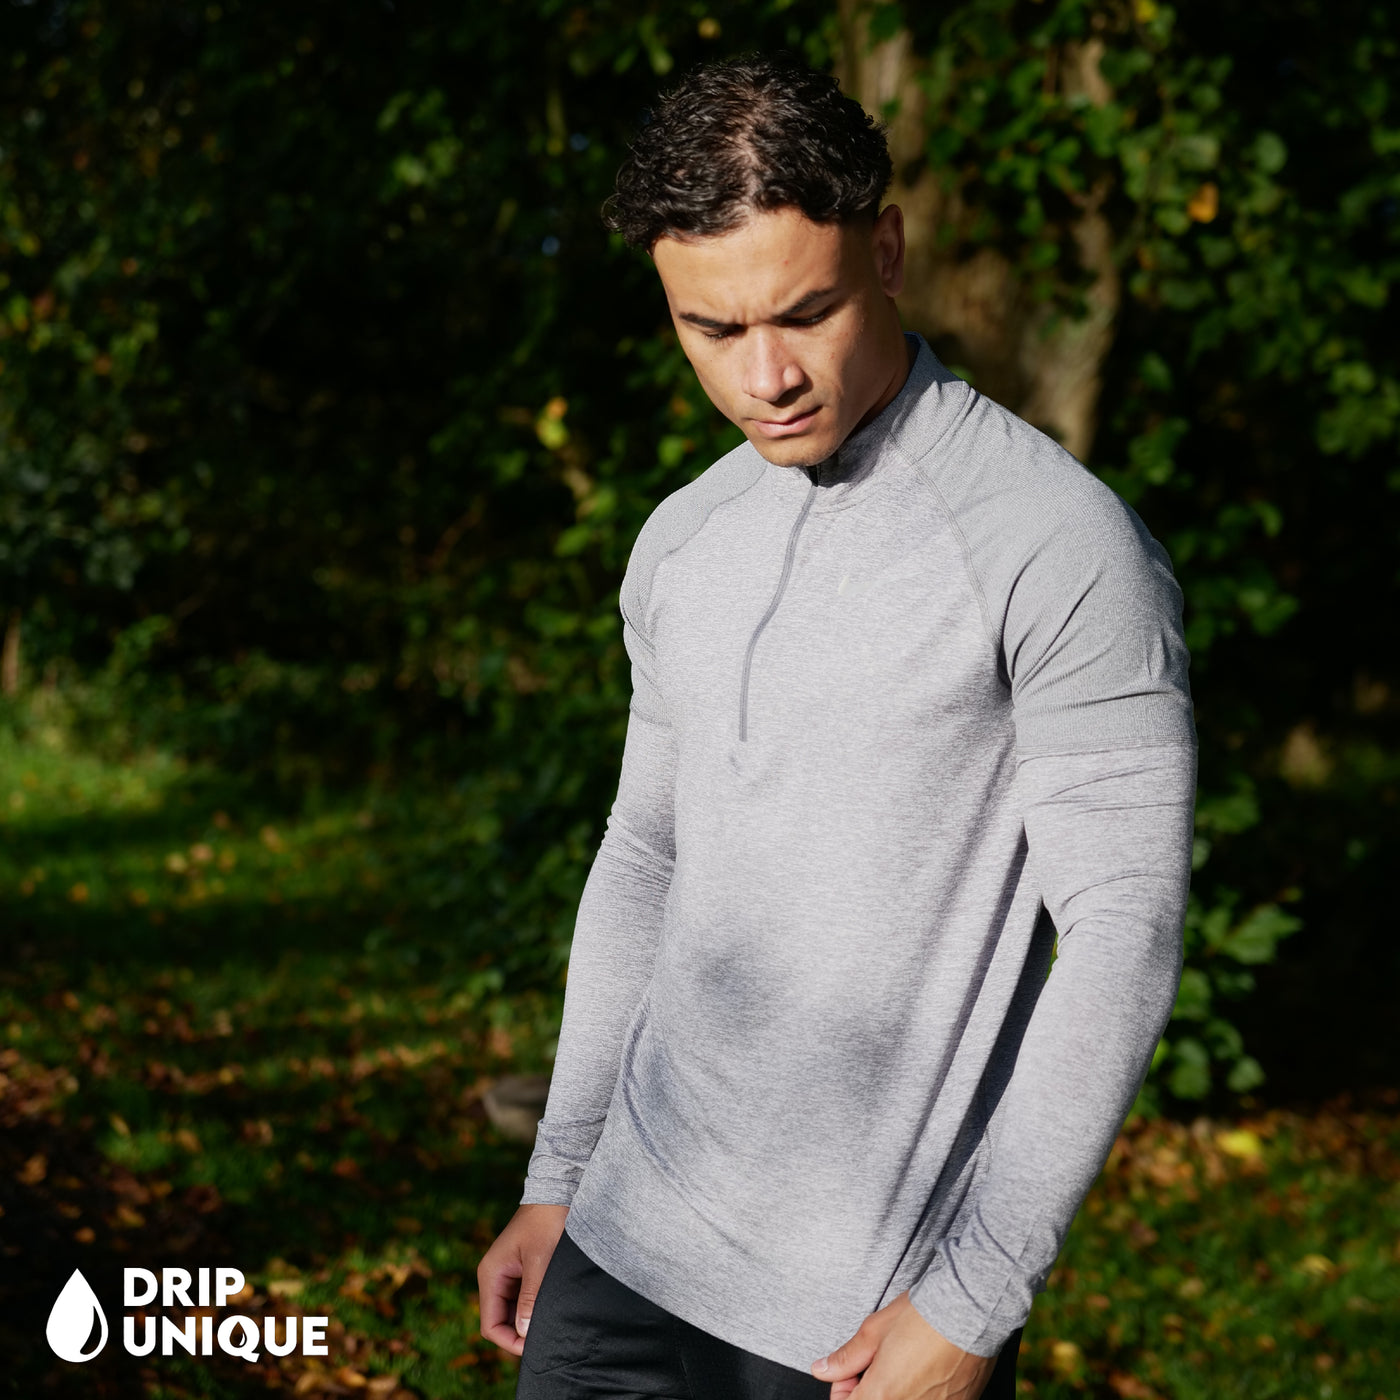 Men's Nike Therma 1/4 Zip Top in a Grey colourway showing the side design, dripuniqueuk